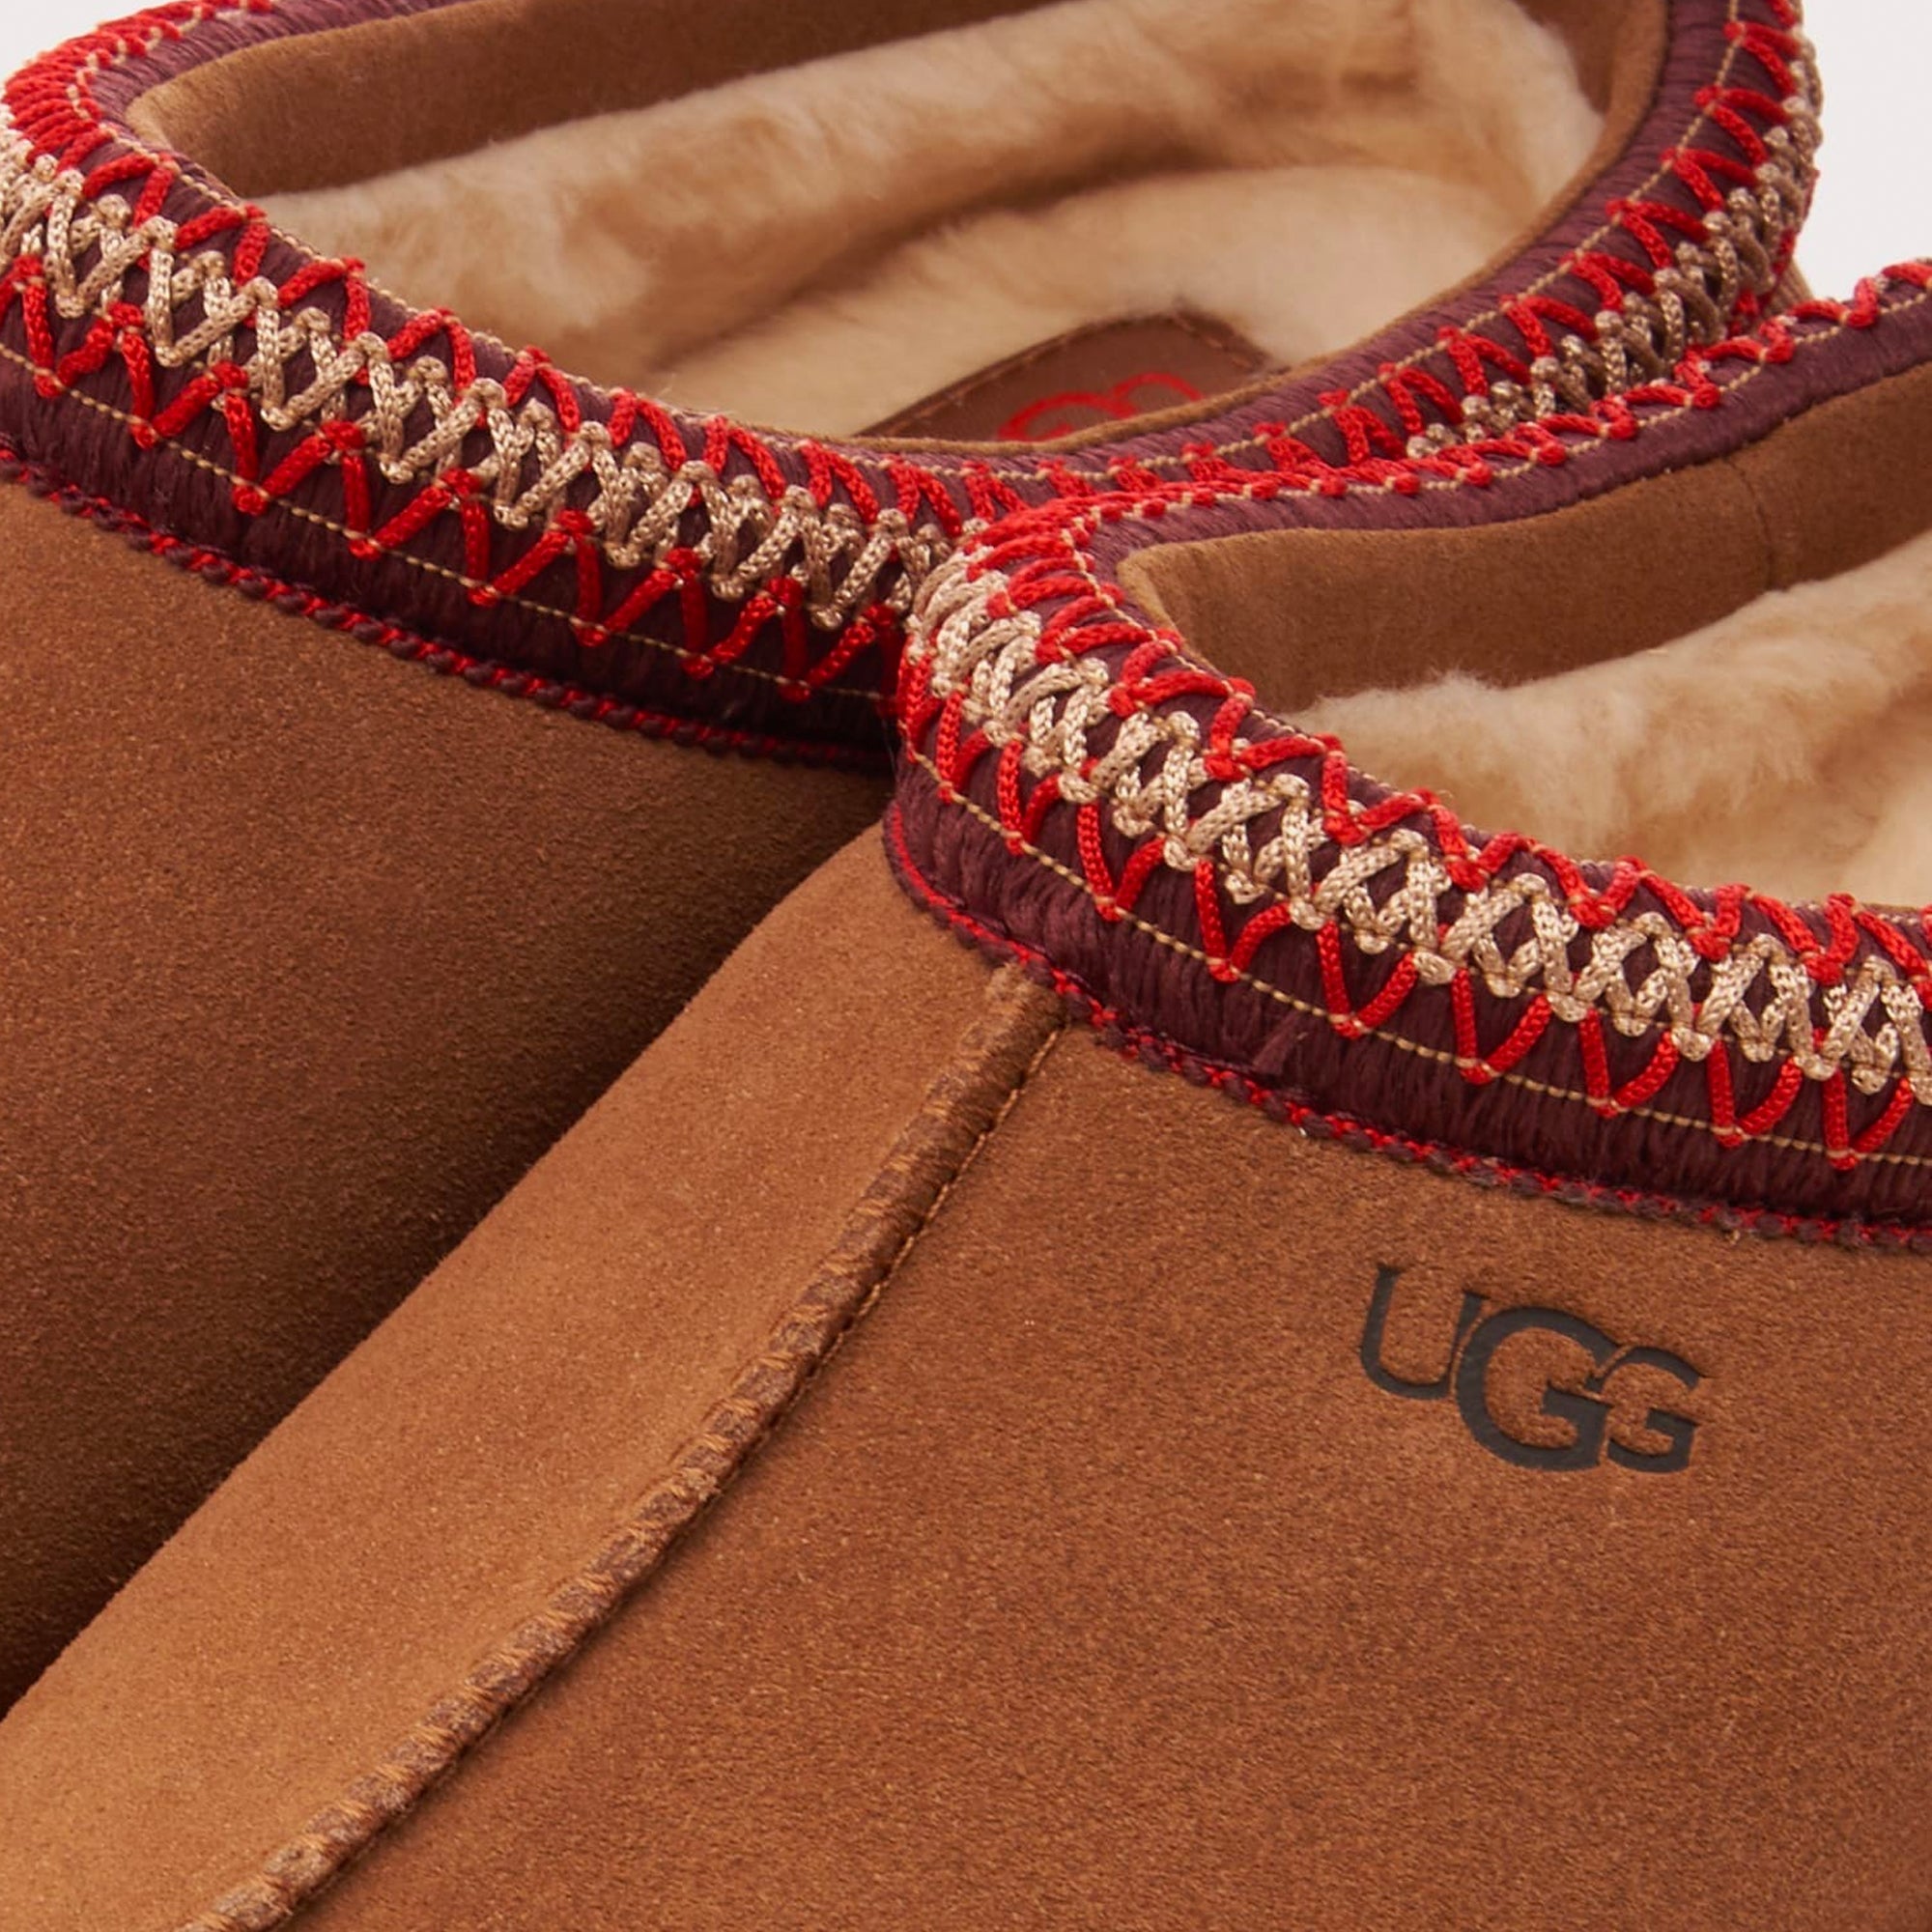 Ugg Womens Tazz Shoes